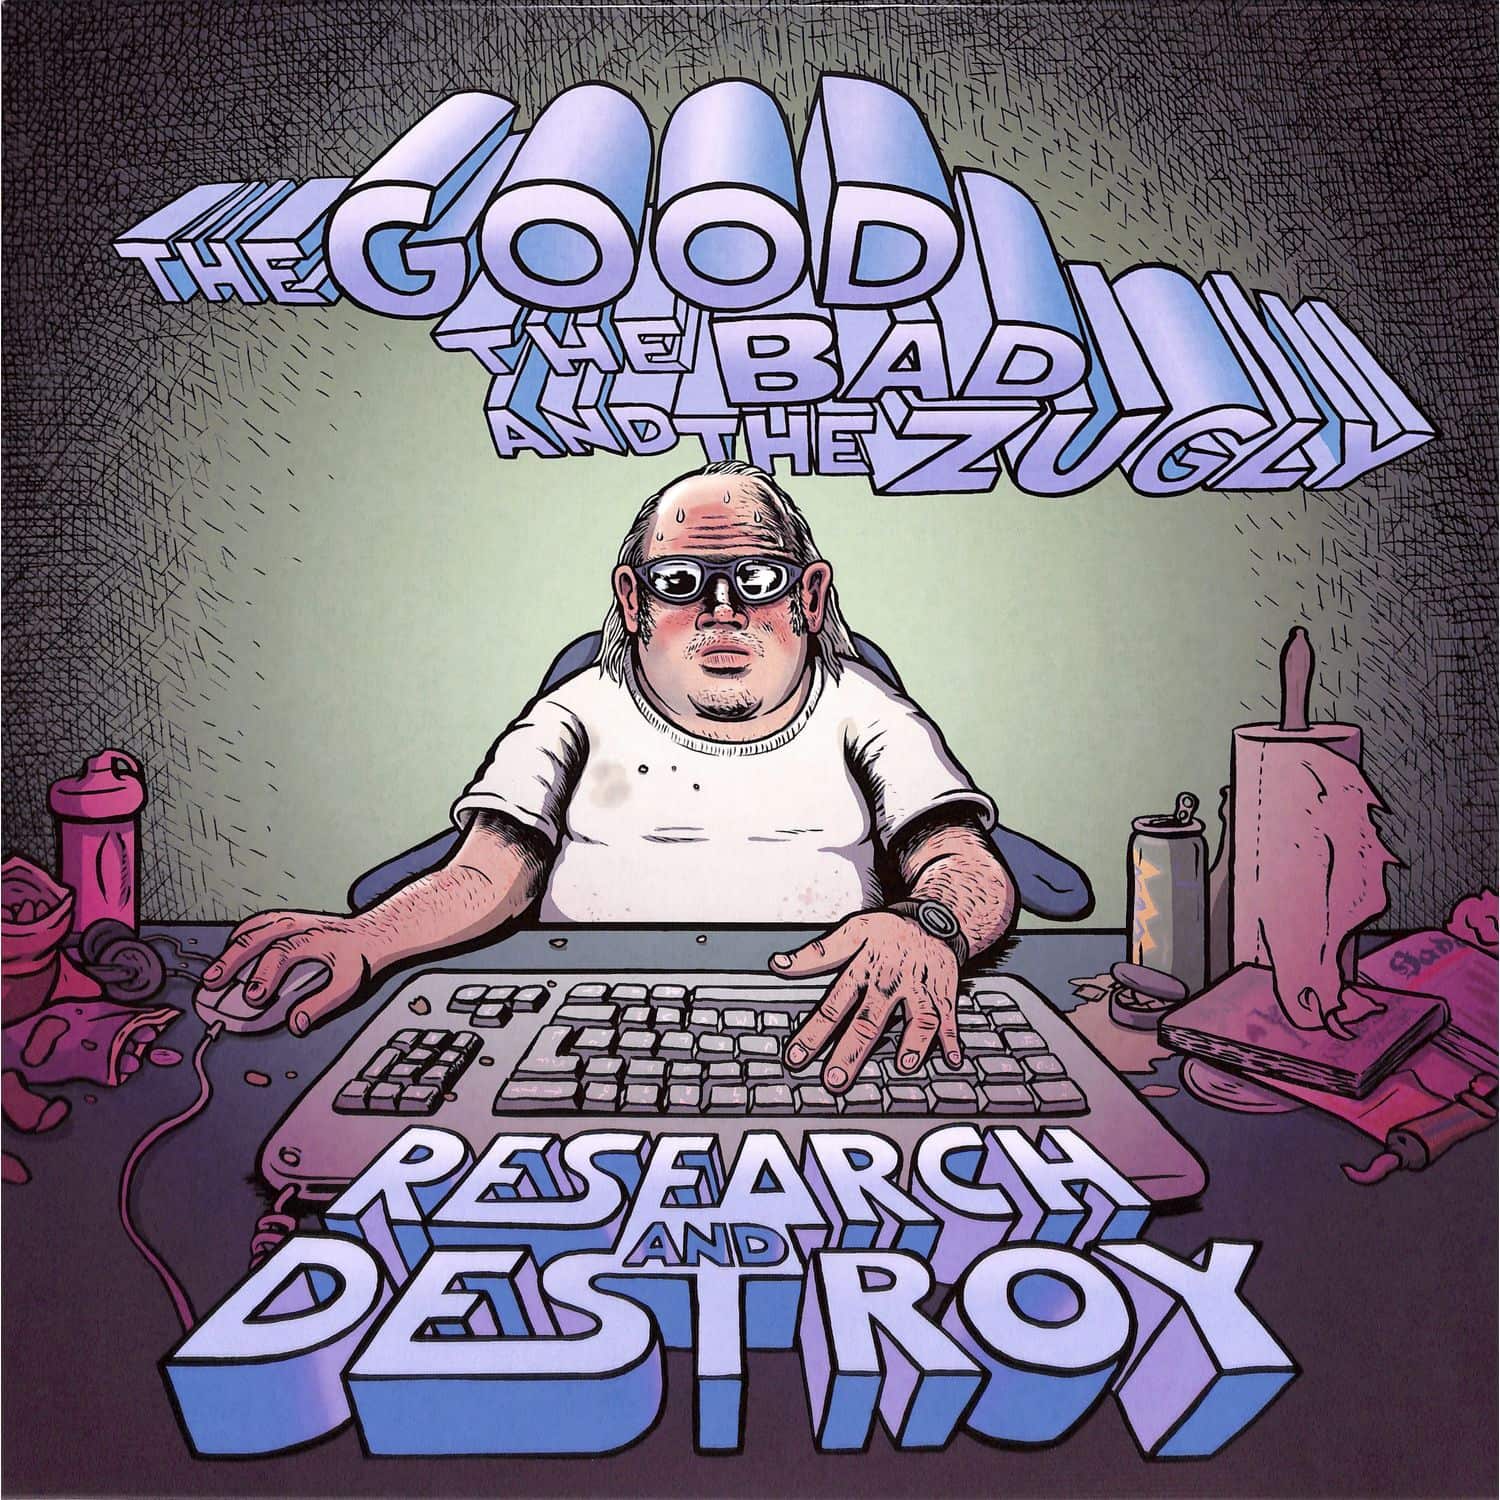  The Bad The Good & The Zugly - RESEARCH & DESTROY 